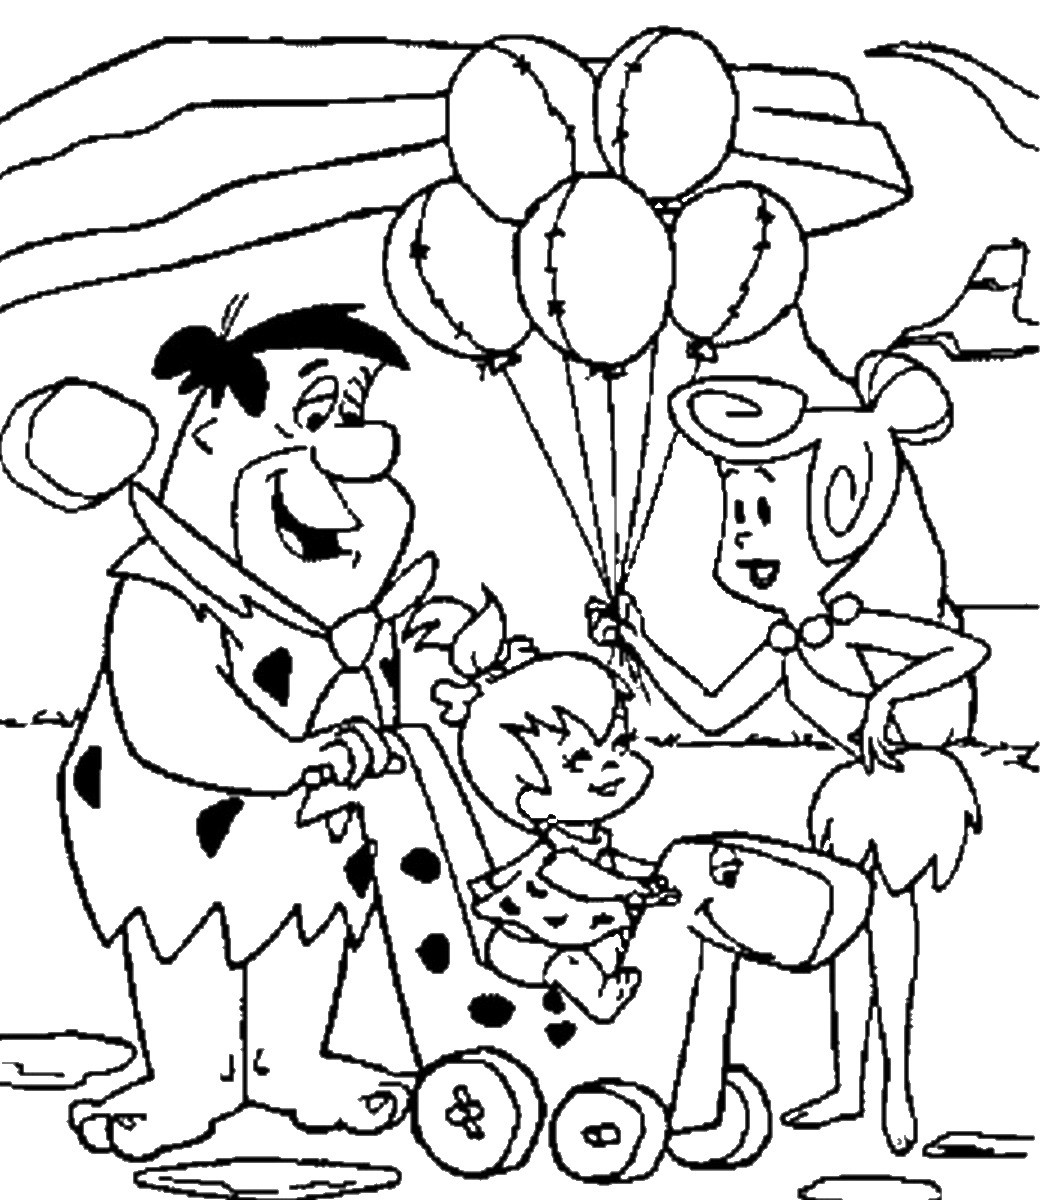 Coloring Books Printables
 The Flintstones Coloring Pages